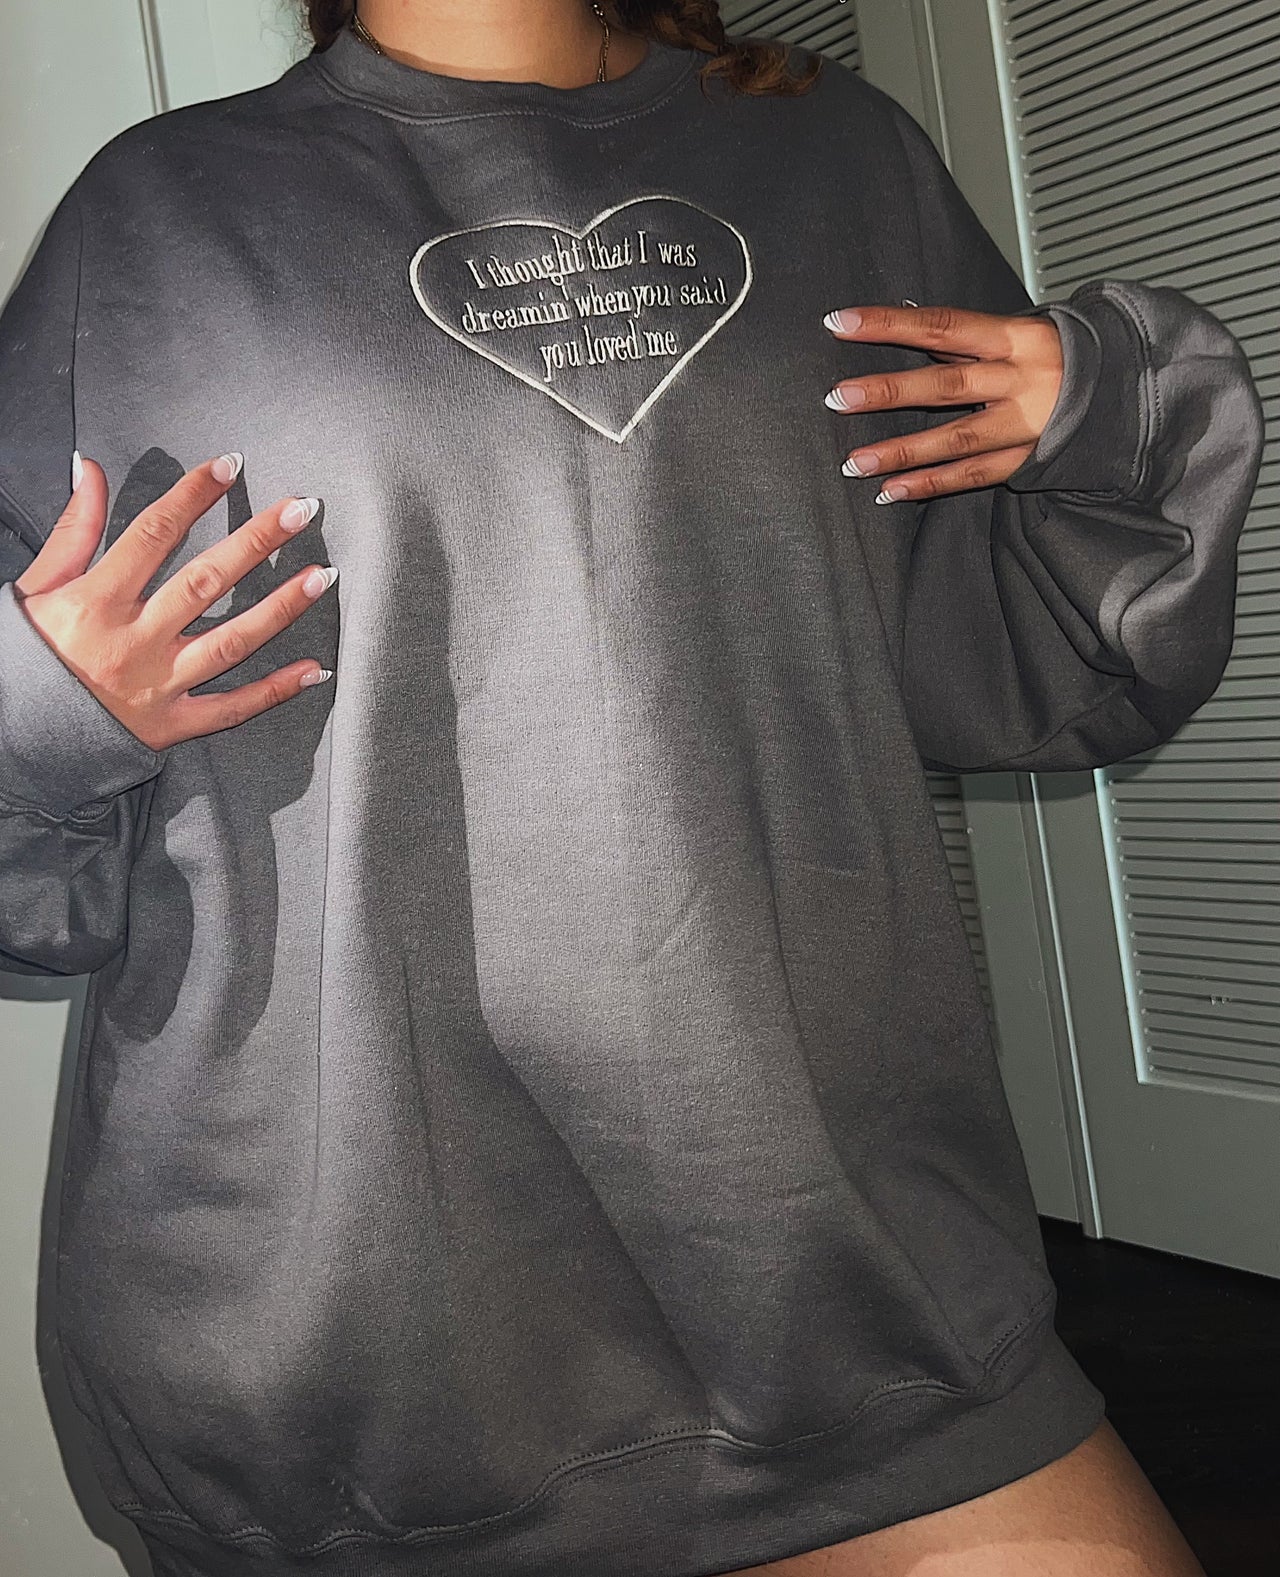 thought that I was dreamin' when you said you love me crewneck